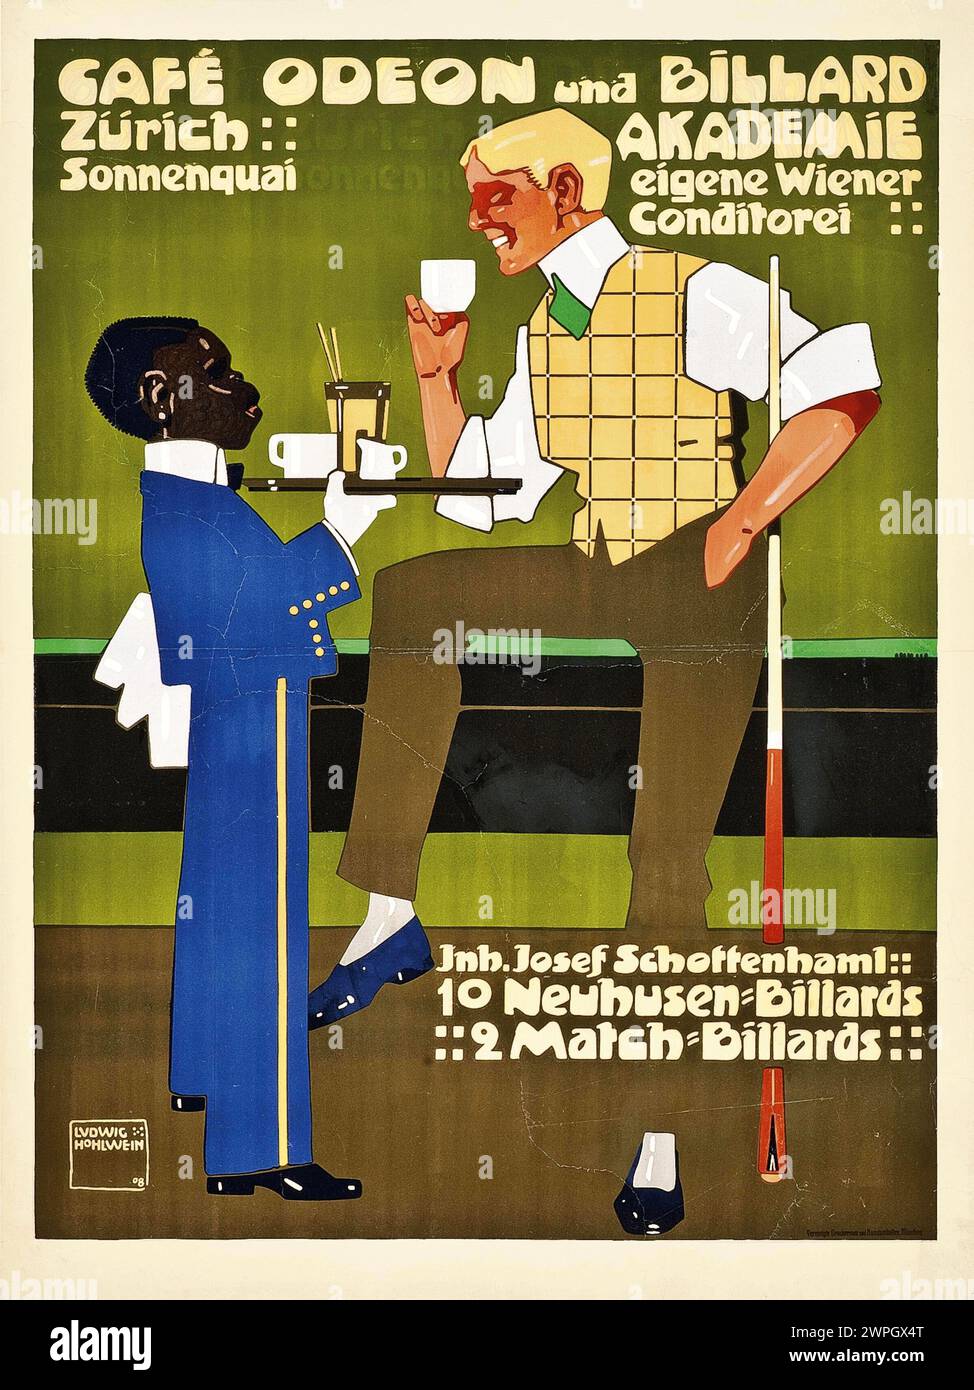 Vintage Advertising Poster Cafe Odeon and Billiard Academy in Zurich by Ludwig Hohlwein  1908.  Poster features a black african young boy dressed up in fancy clothing waiting on dandy drinking coffee Stock Photo